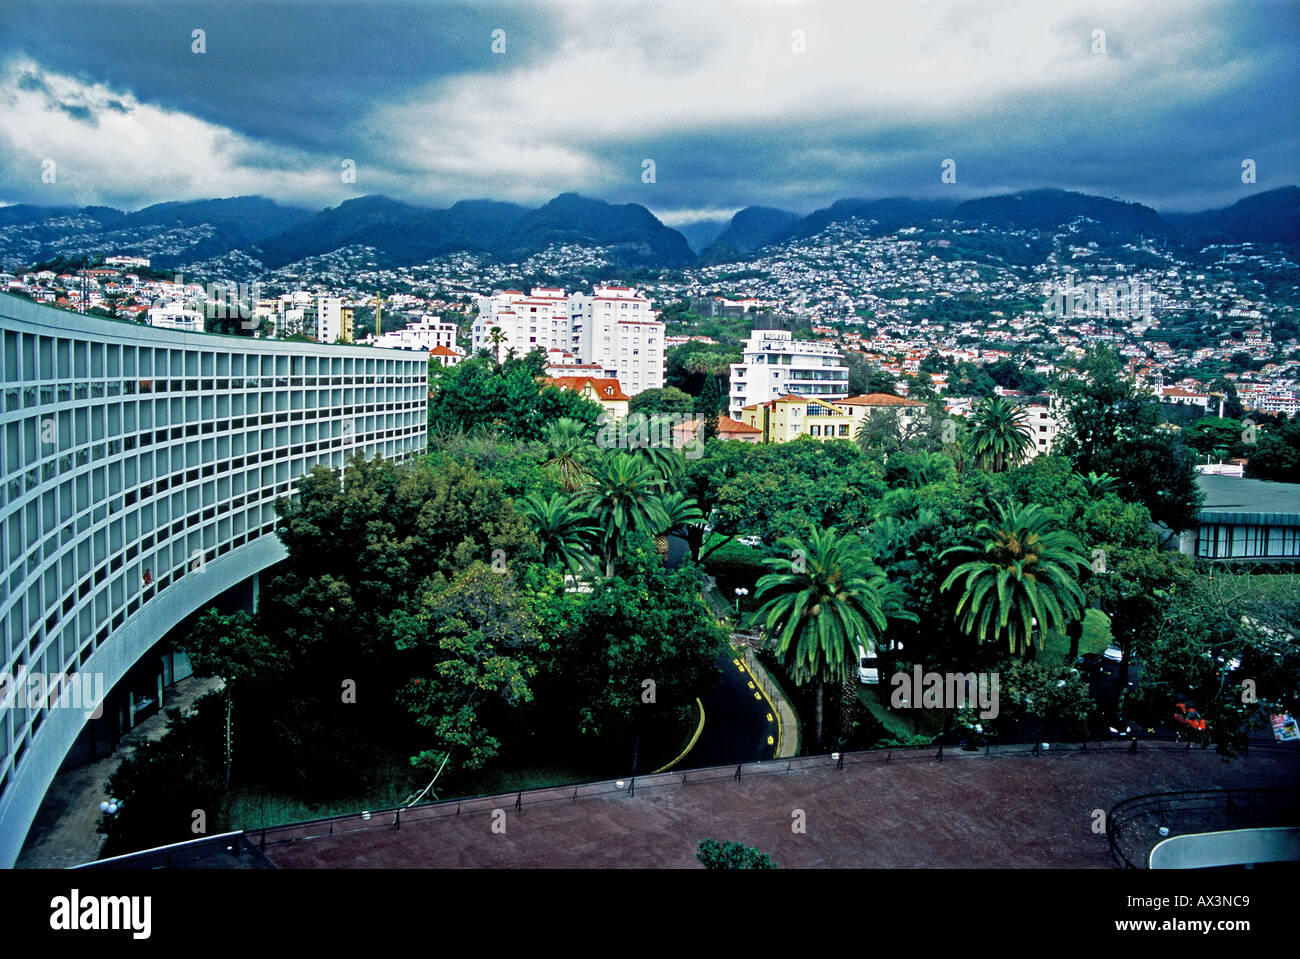 Madeira Funchal, View across Funchal, featuring the Carlton Park Hotel built designed on stilts to allow views Stock Photo